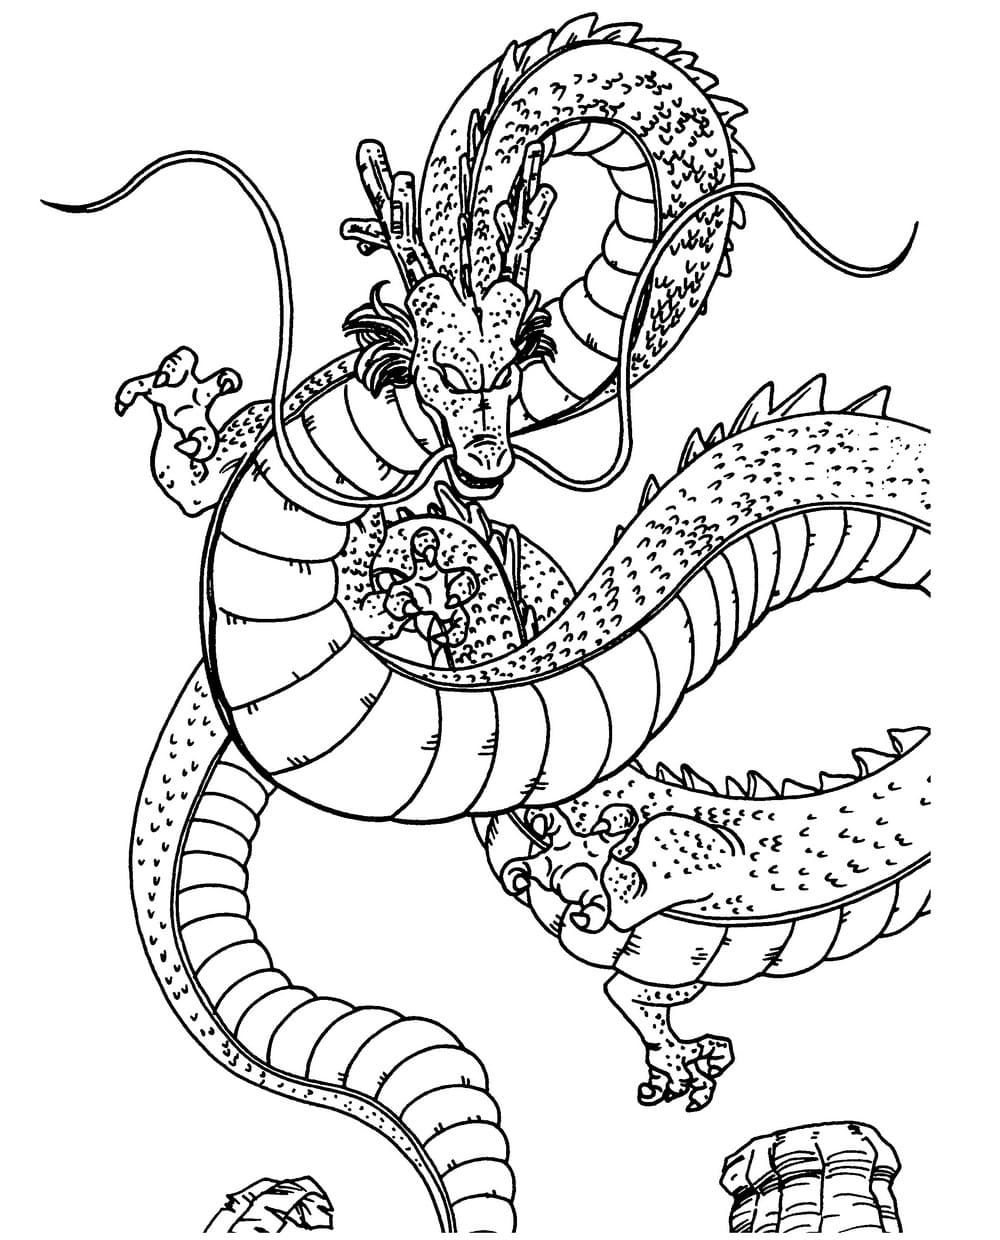 Dragons Coloring Pages. Print for free.